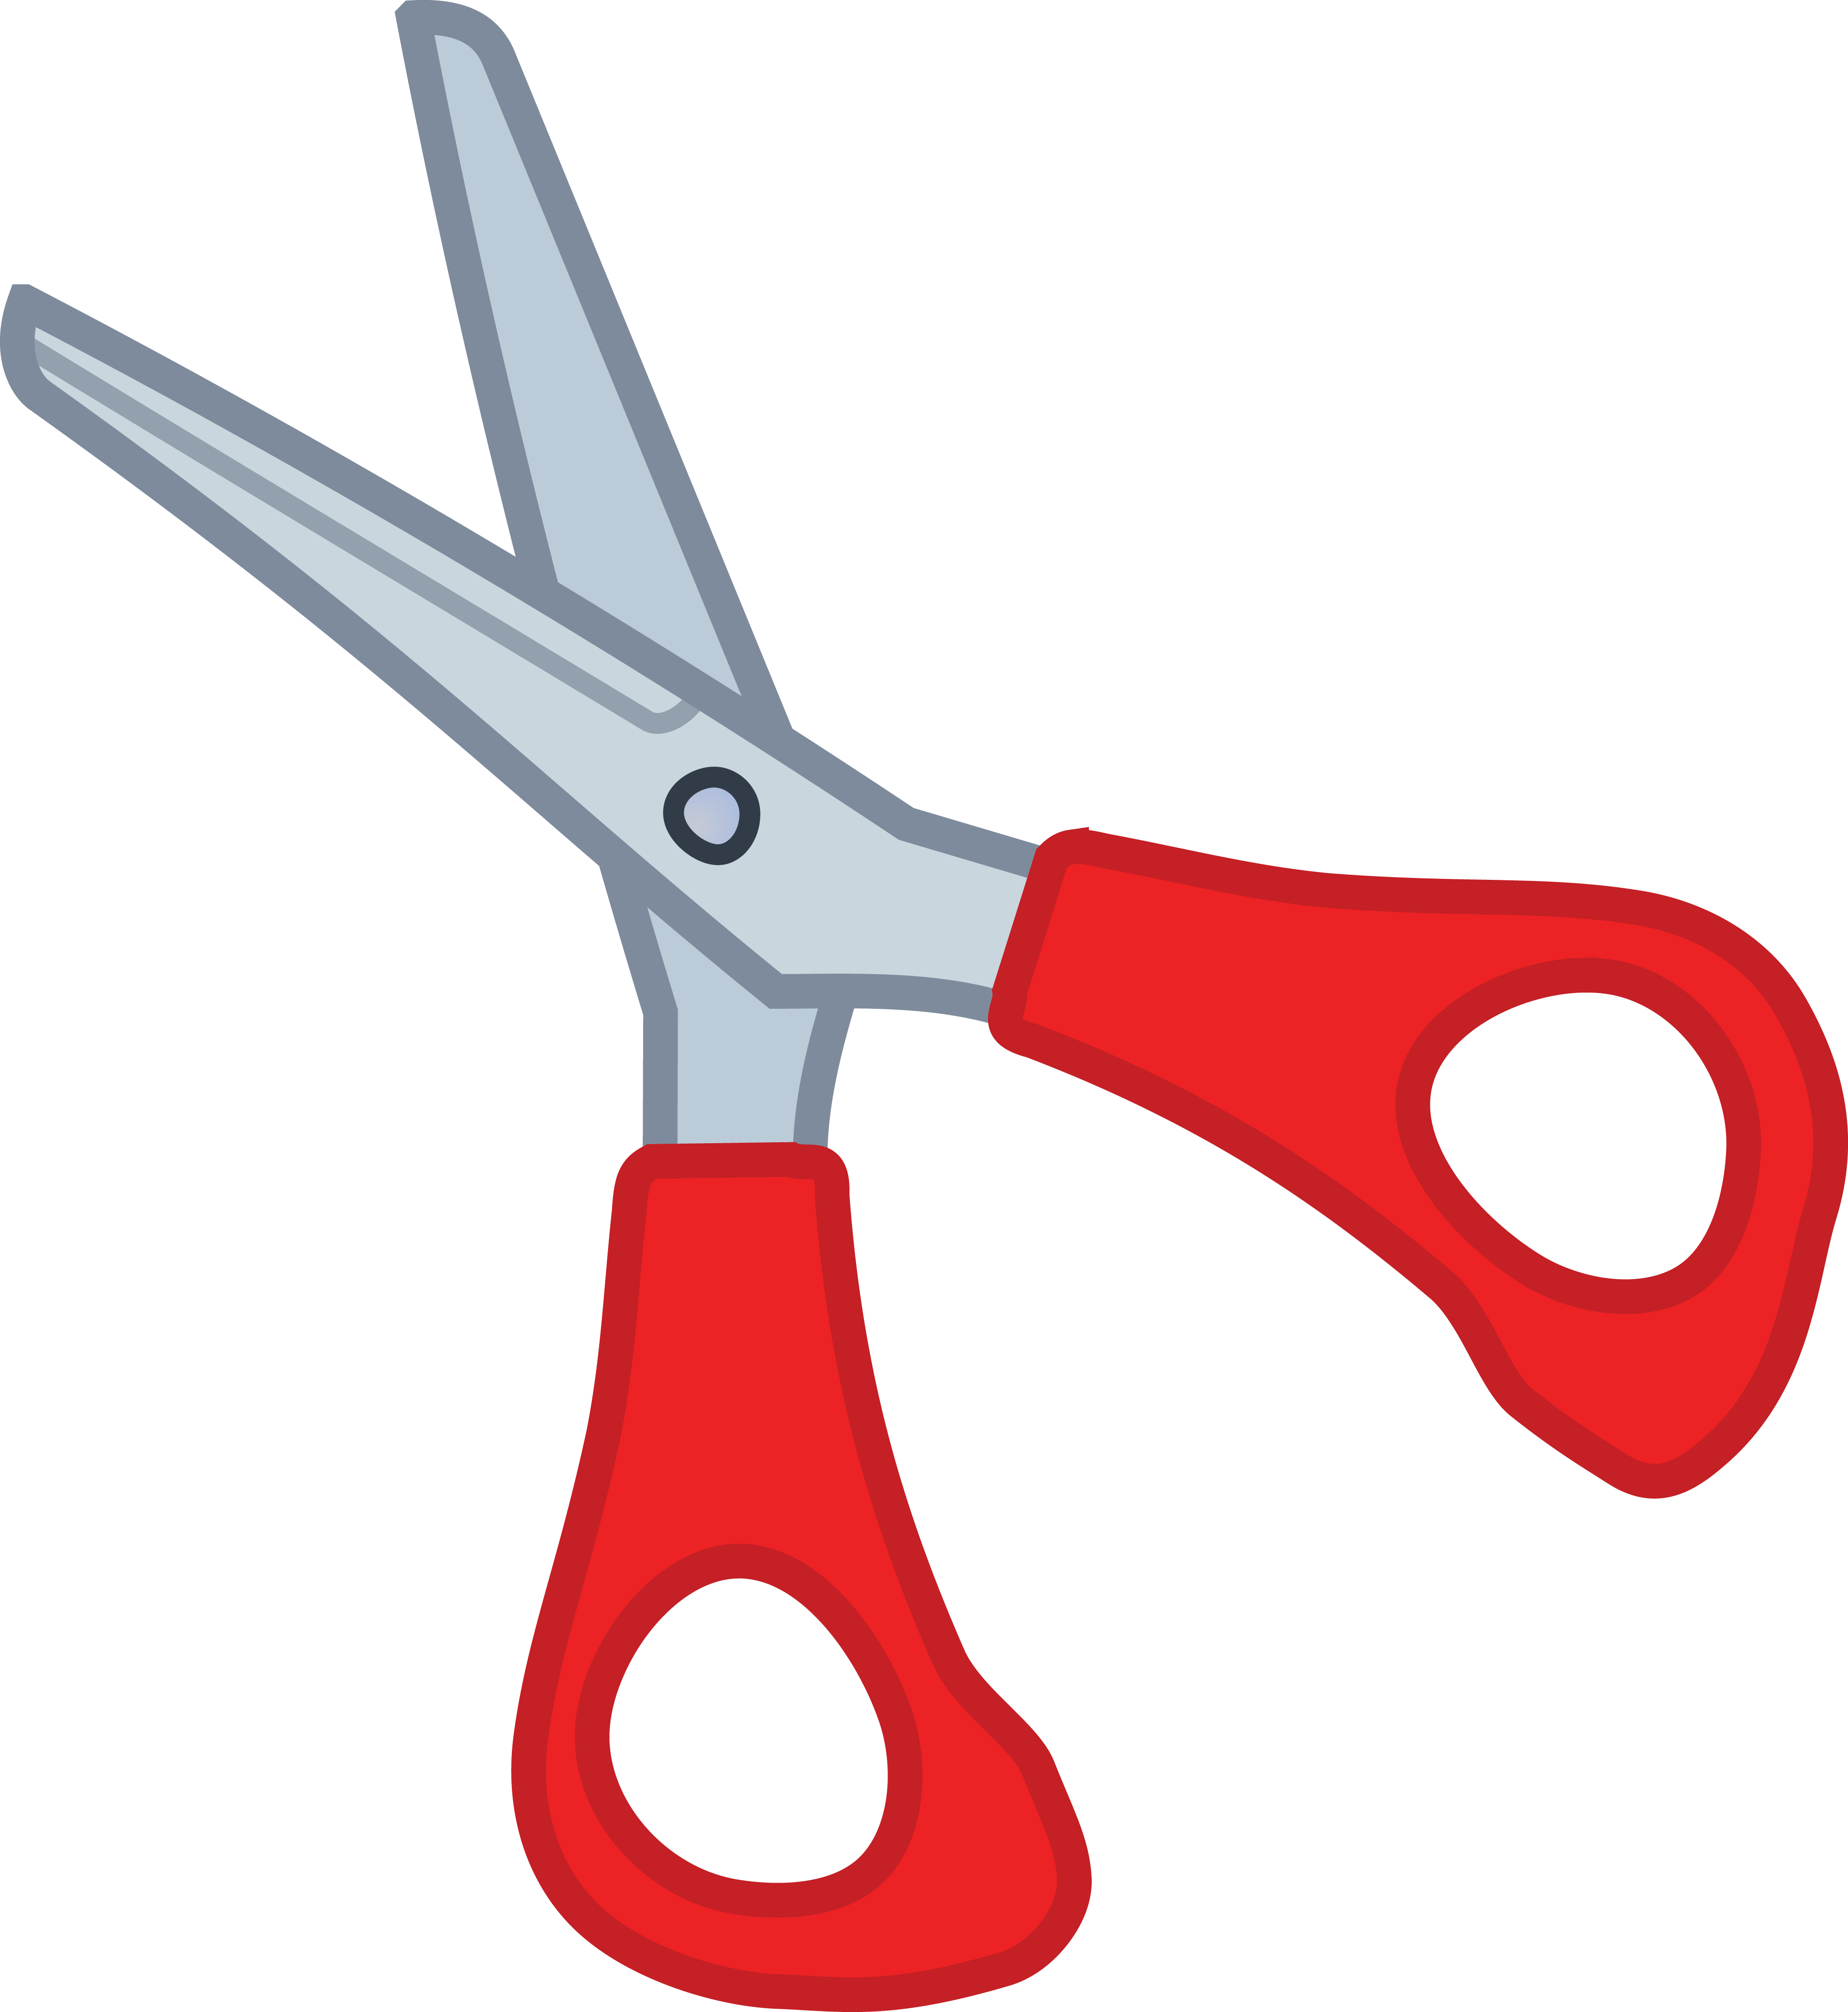 For the simple scissors, the 